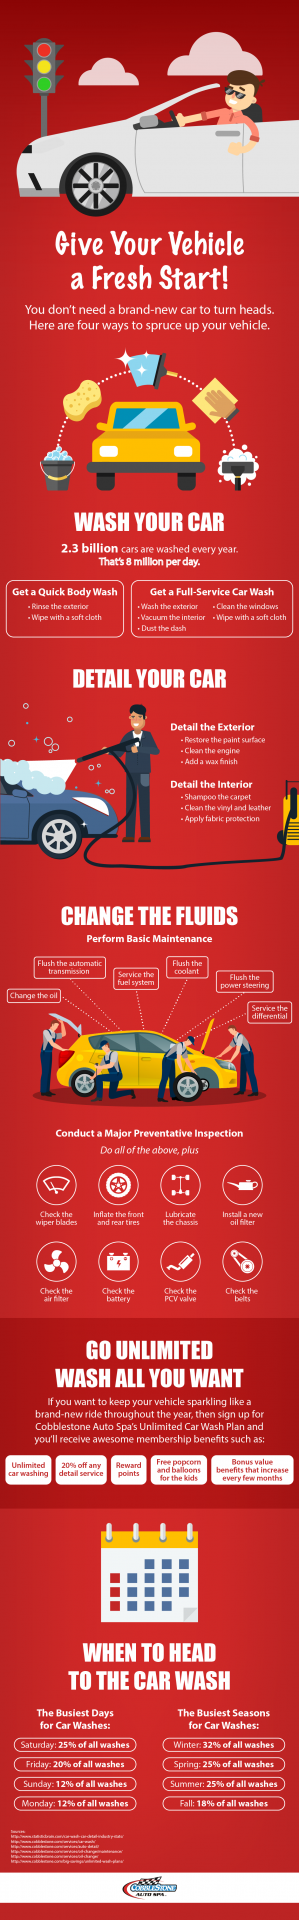 Give Your Vehicle a Fresh Start